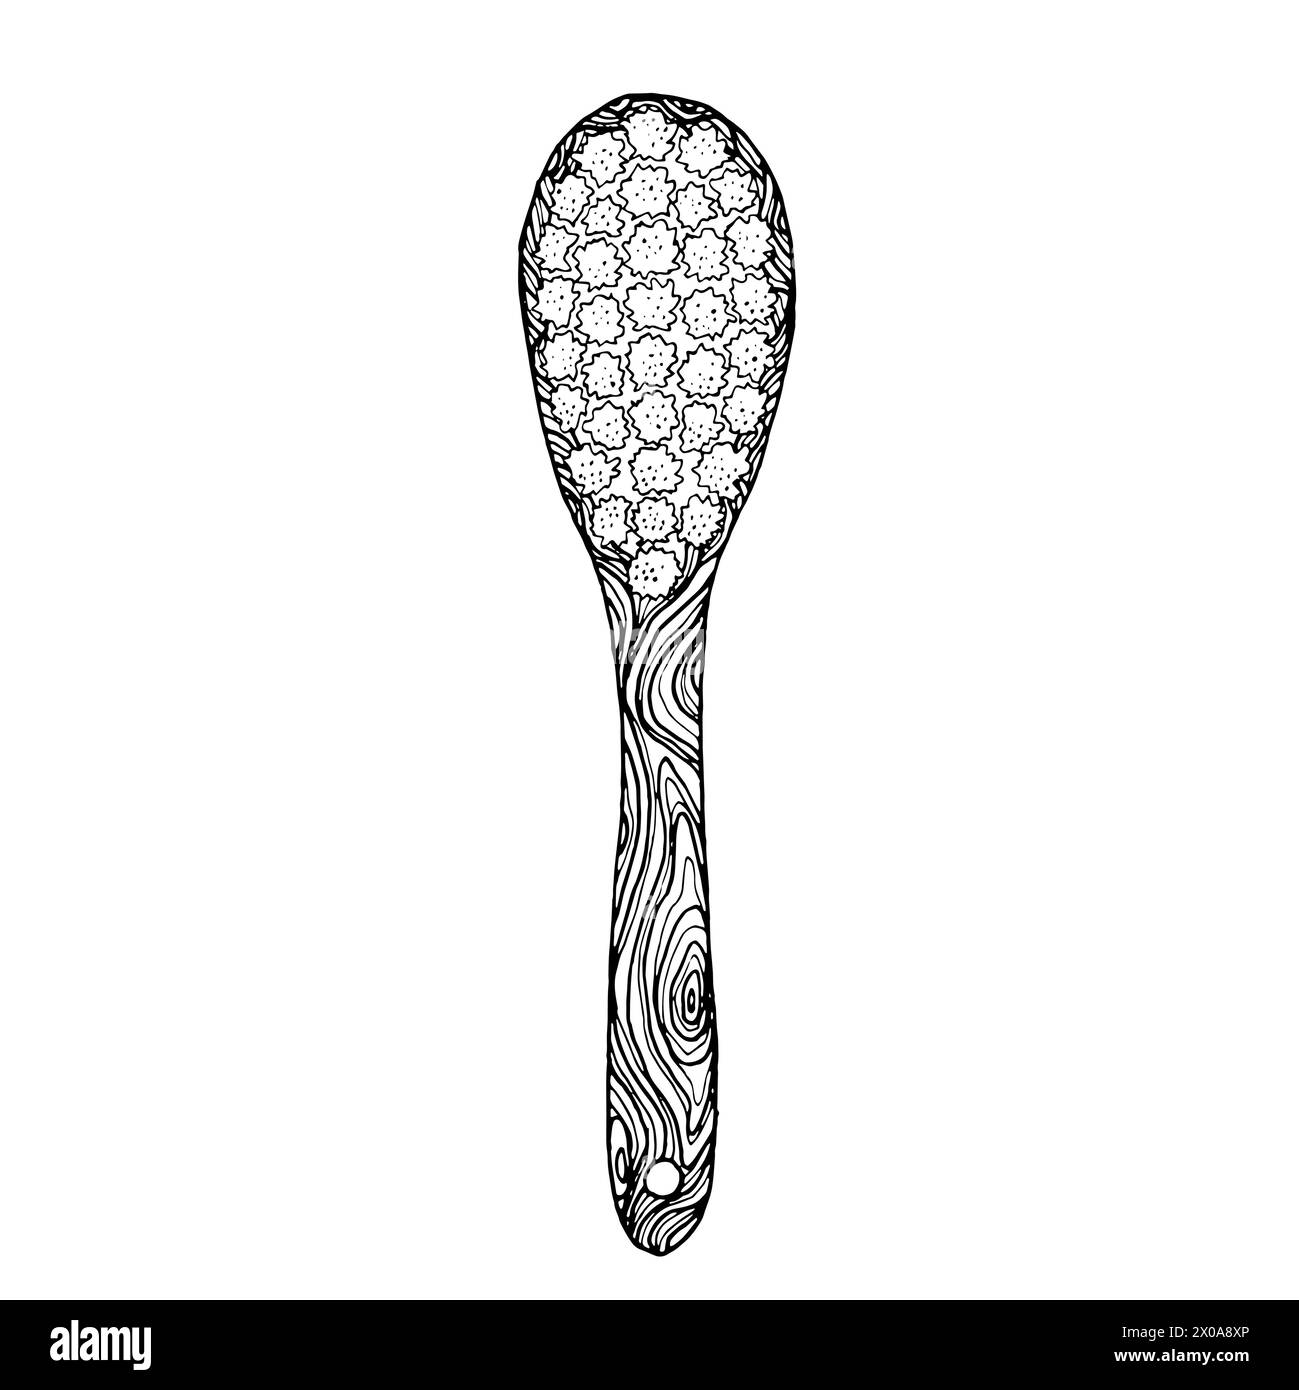 Handdrawn doodle wooden massage brush for body care and skin health. Natural organic Zero waste concept. Isolated on the white background Stock Vector